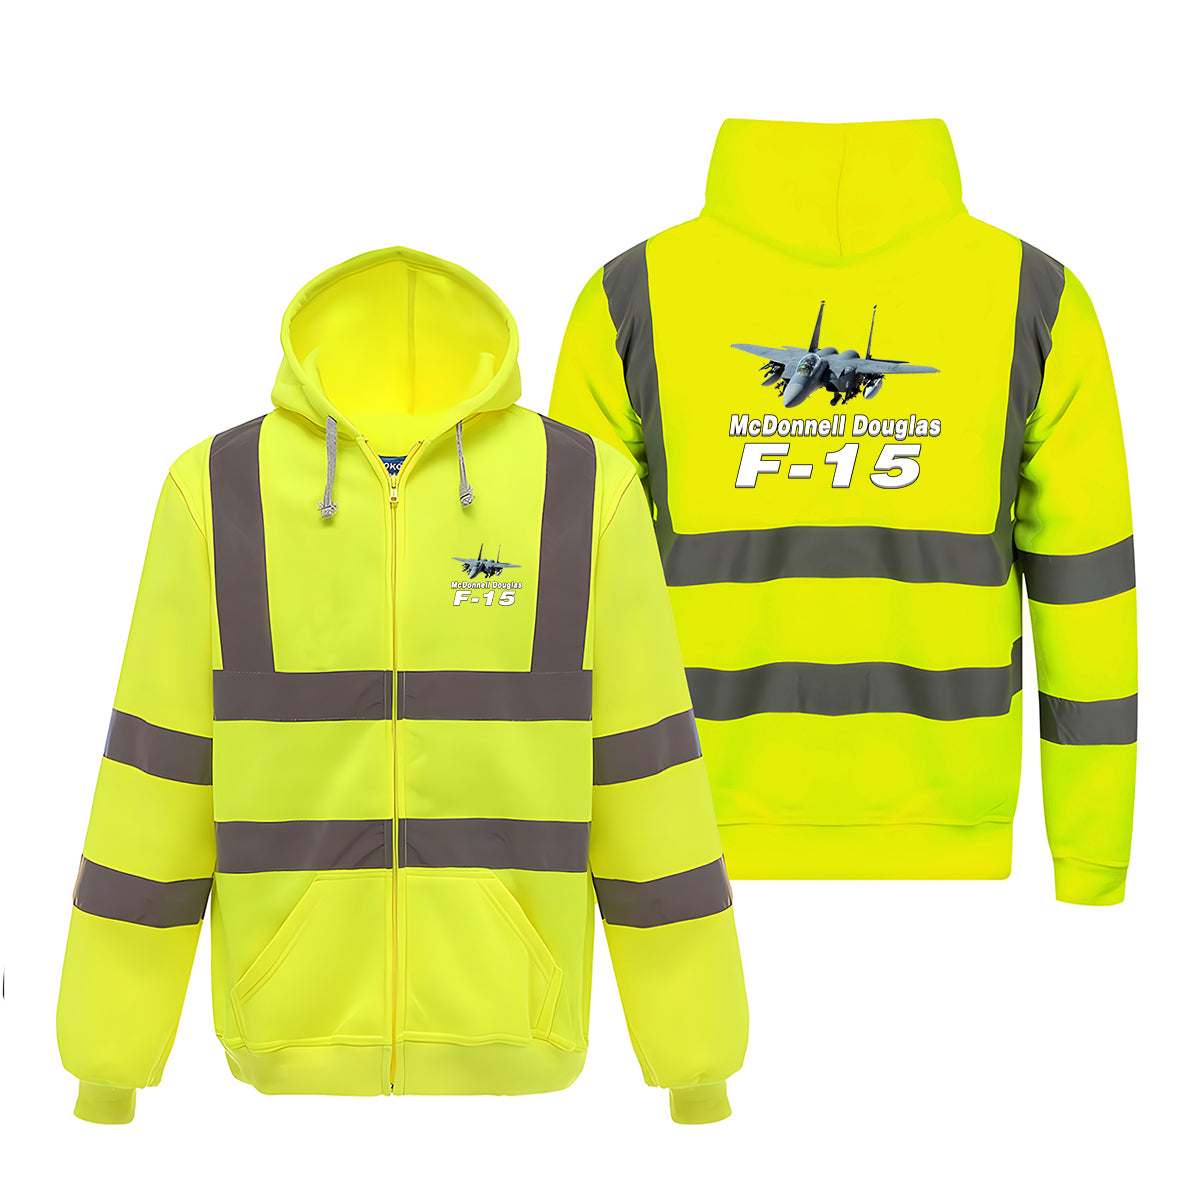 The McDonnell Douglas F15 Designed Reflective Zipped Hoodies